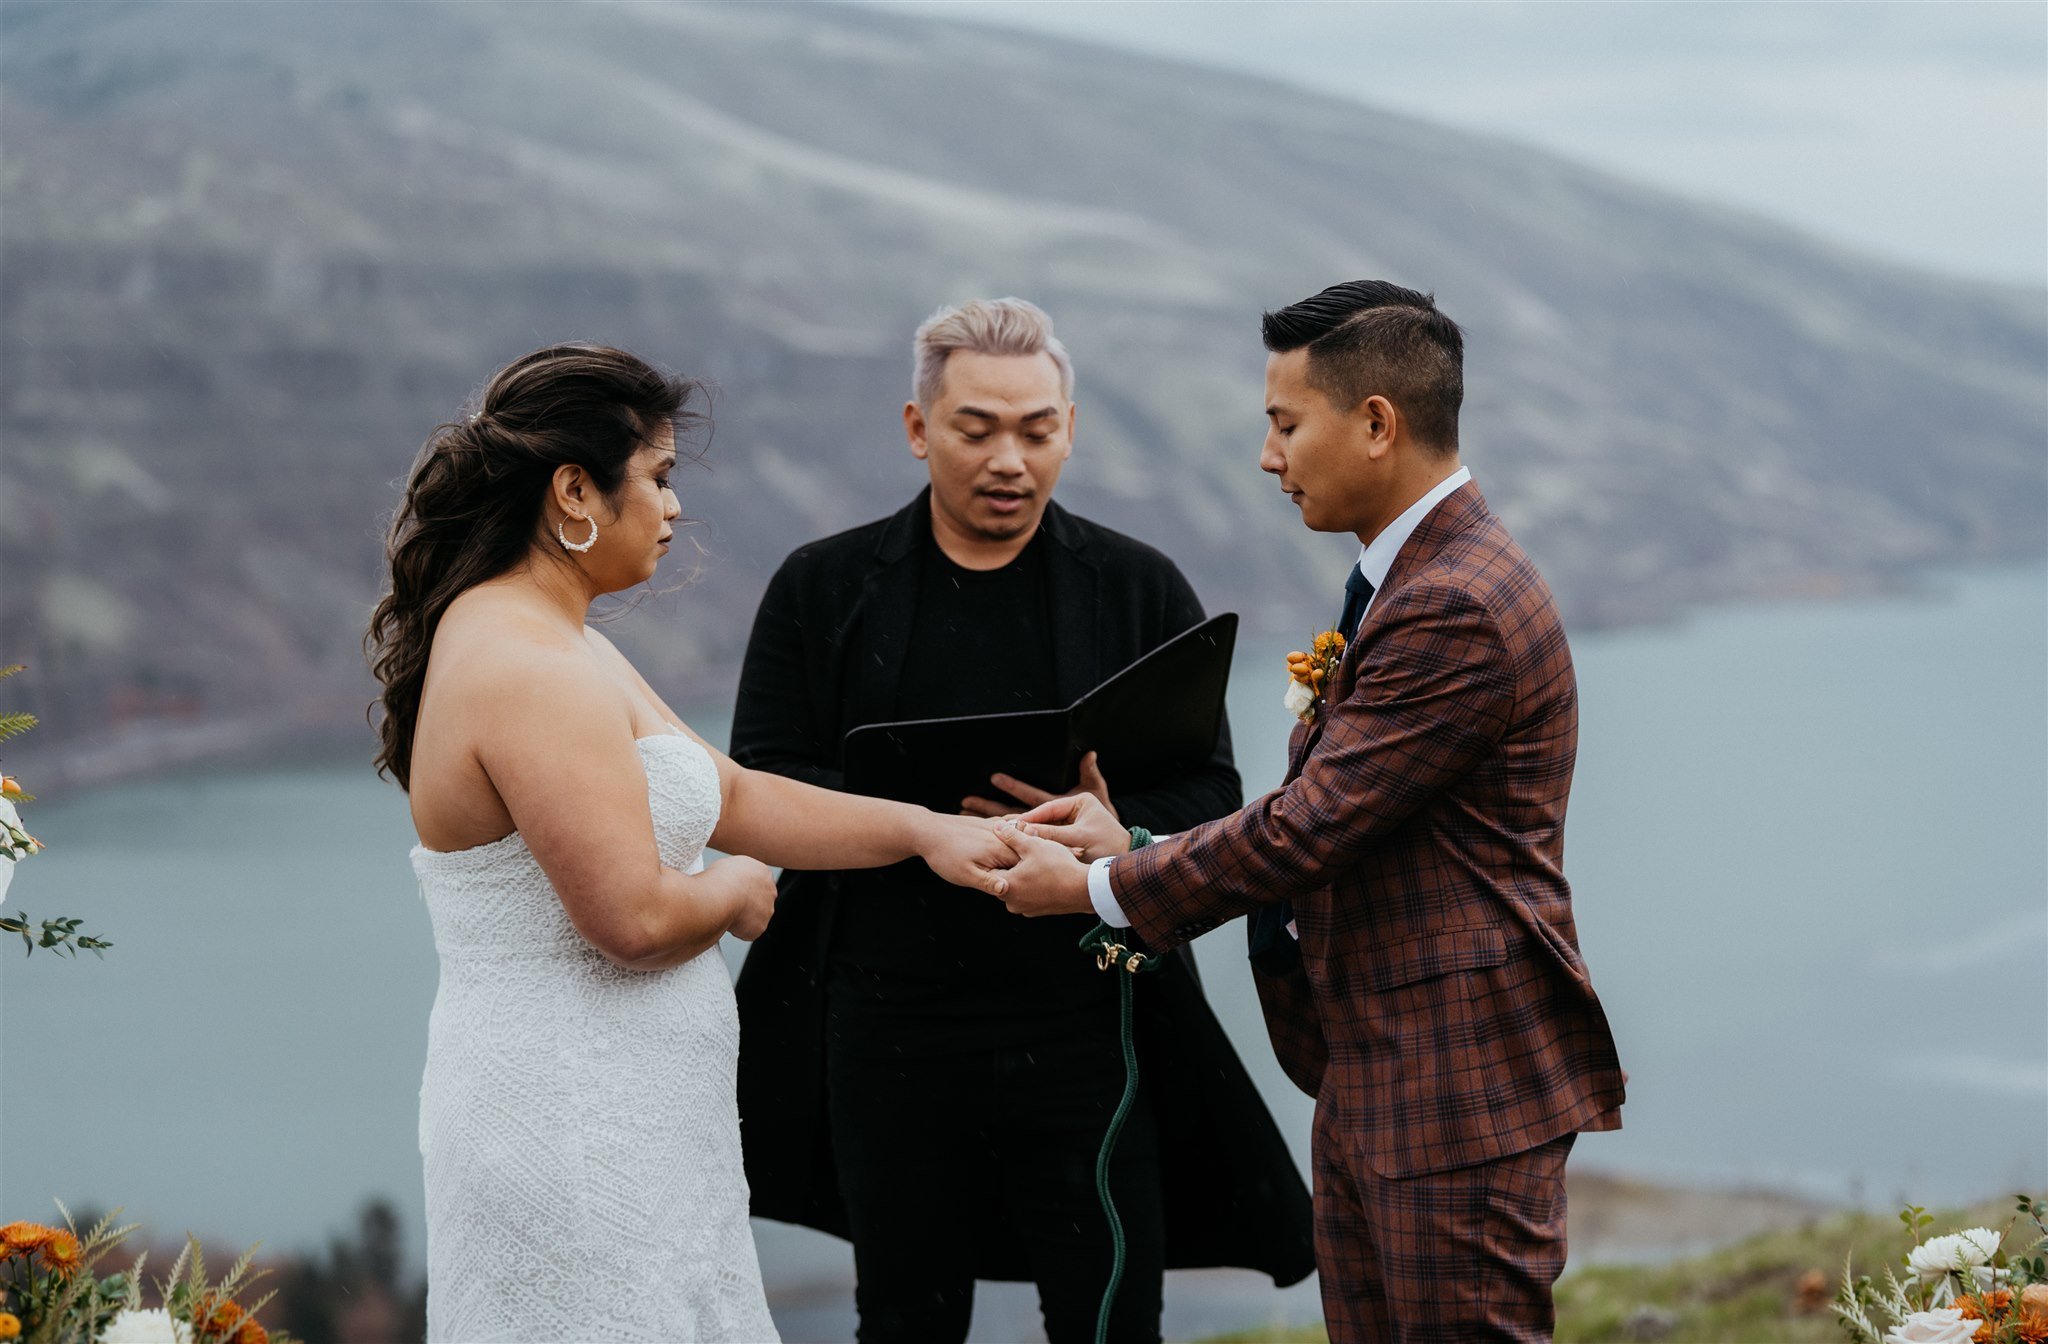 Bride and groom exchange rings at Oregon elopement ceremony